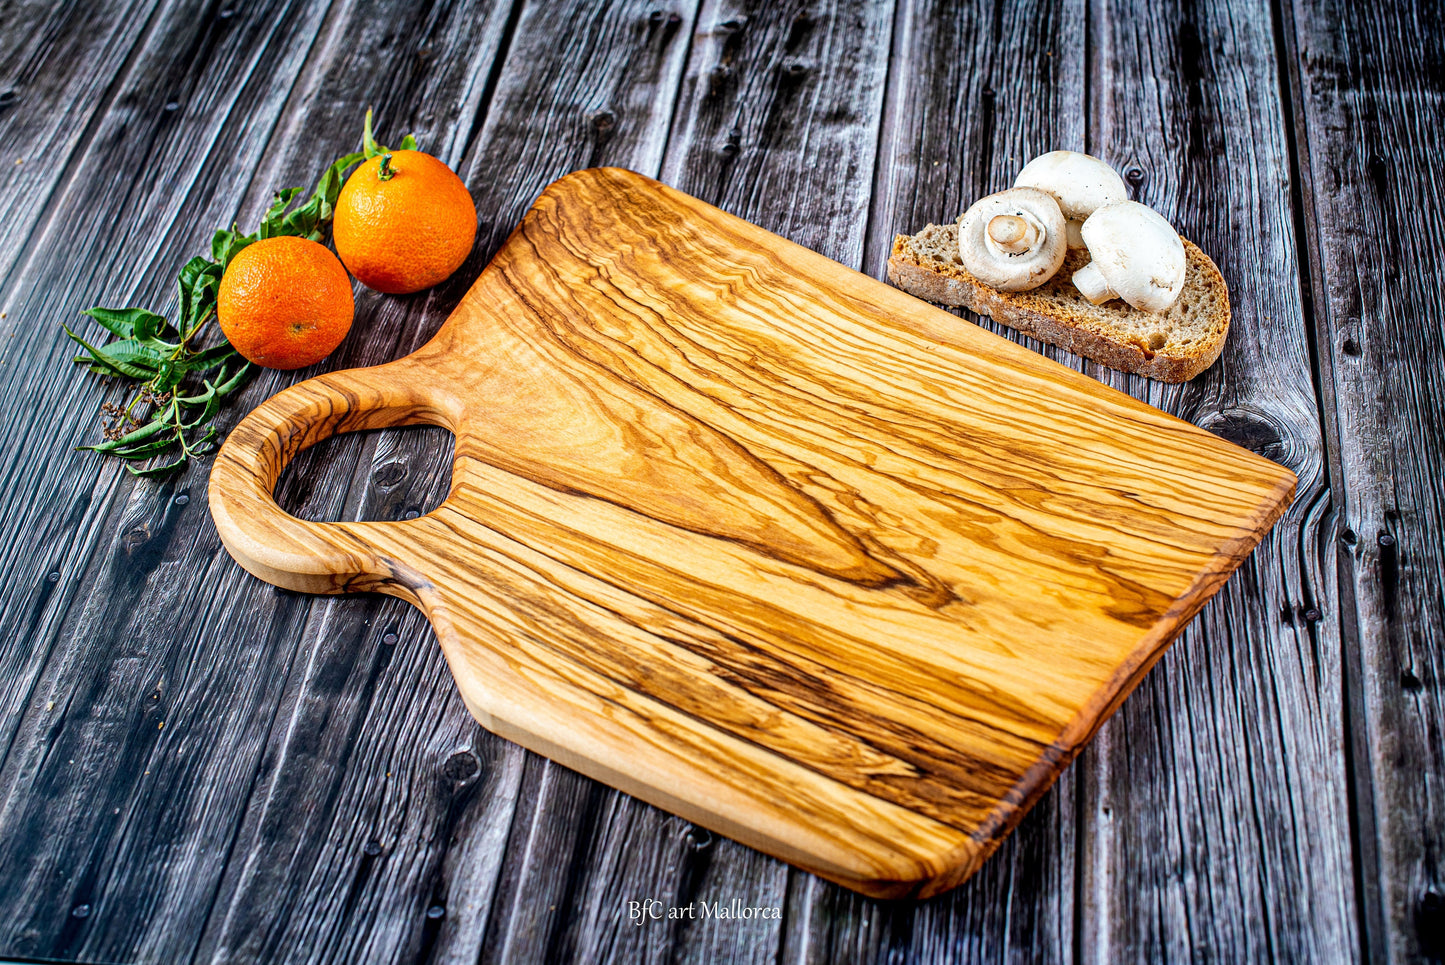 Cutting Board With Handle Olive Wood, Cutting Boards Mallorca design, Olive Wood Cutting Board for Meat And Cheese Tray, Bread Slicer, Cheese Board